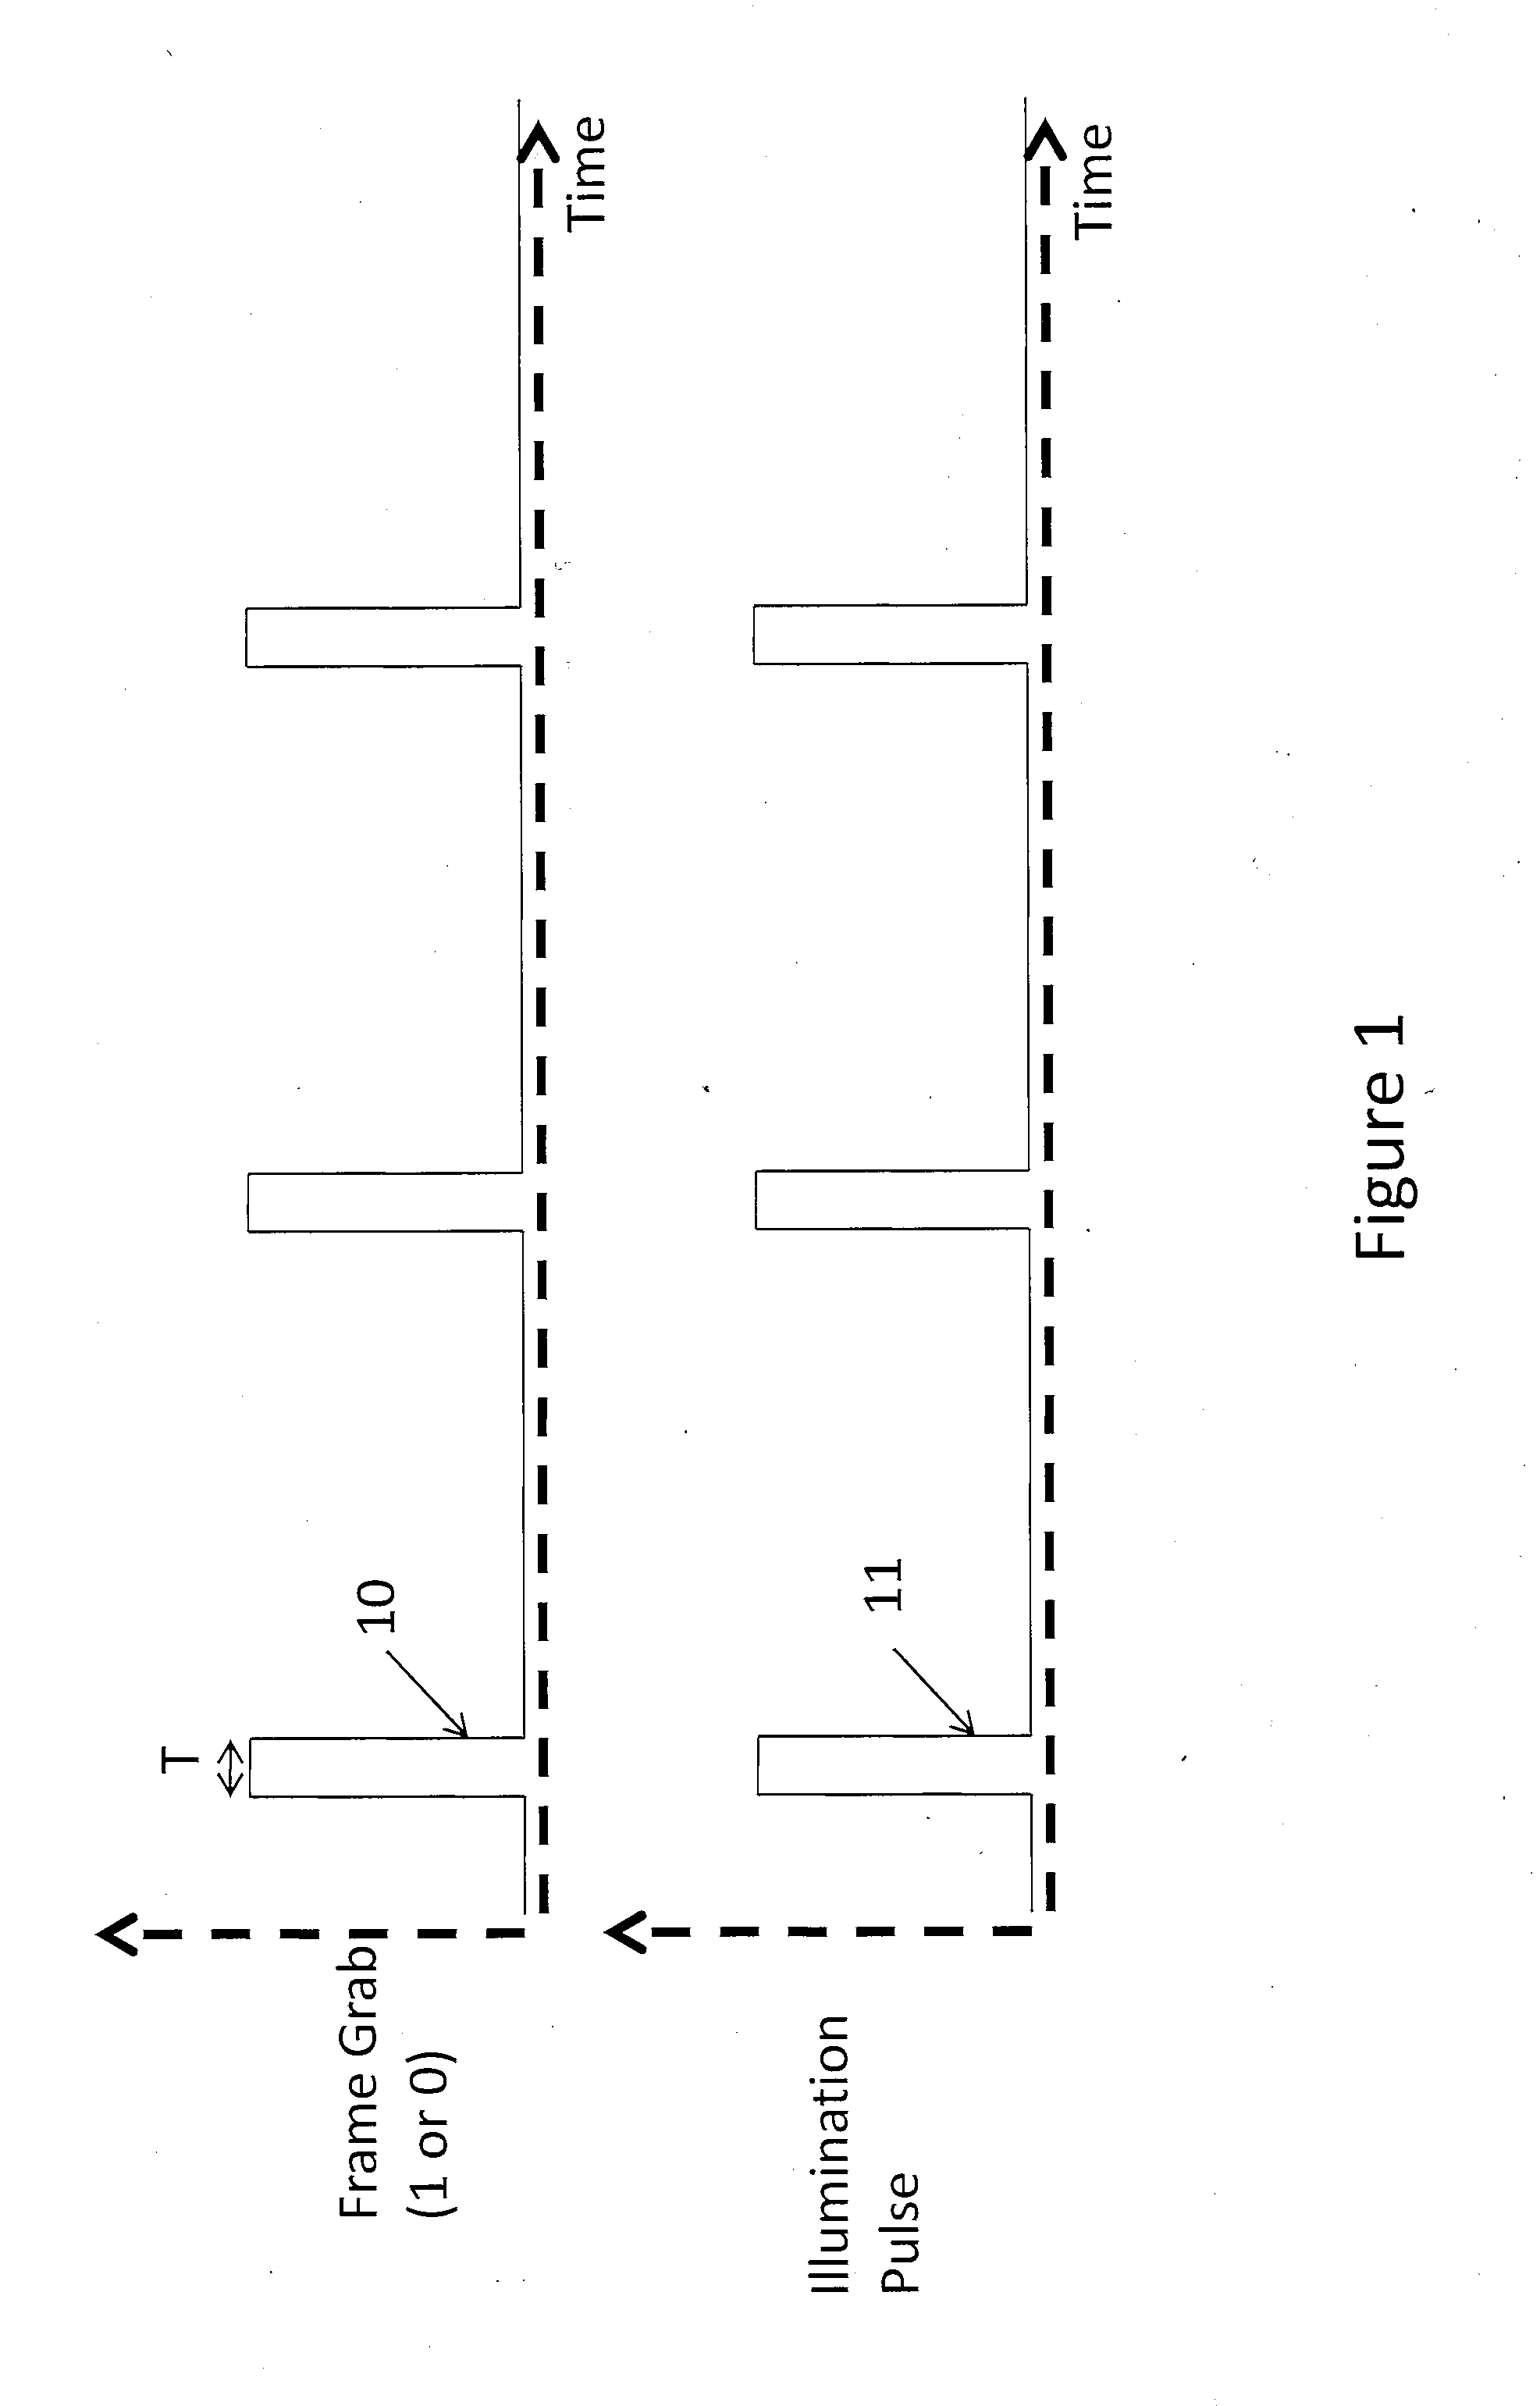 Method of Reducing Visibility of Pulsed Illumination While Acquiring High Quality Imagery